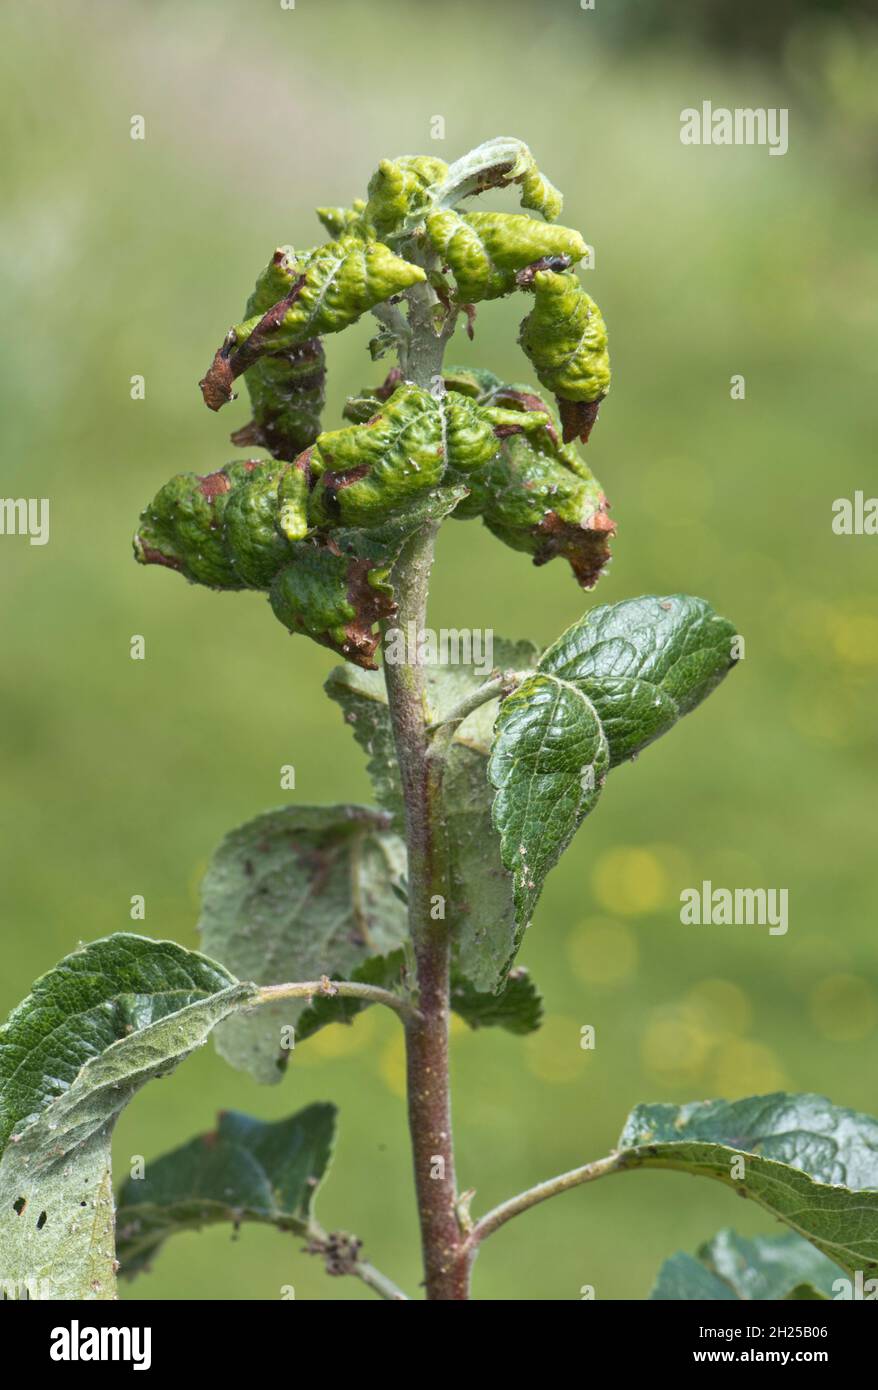 Characteristic lateral rolling damage and necrosis caused by rosy apple aphid (Dysaphis plantaginea) to Discovery apple leaves, Berkshire, June Stock Photo